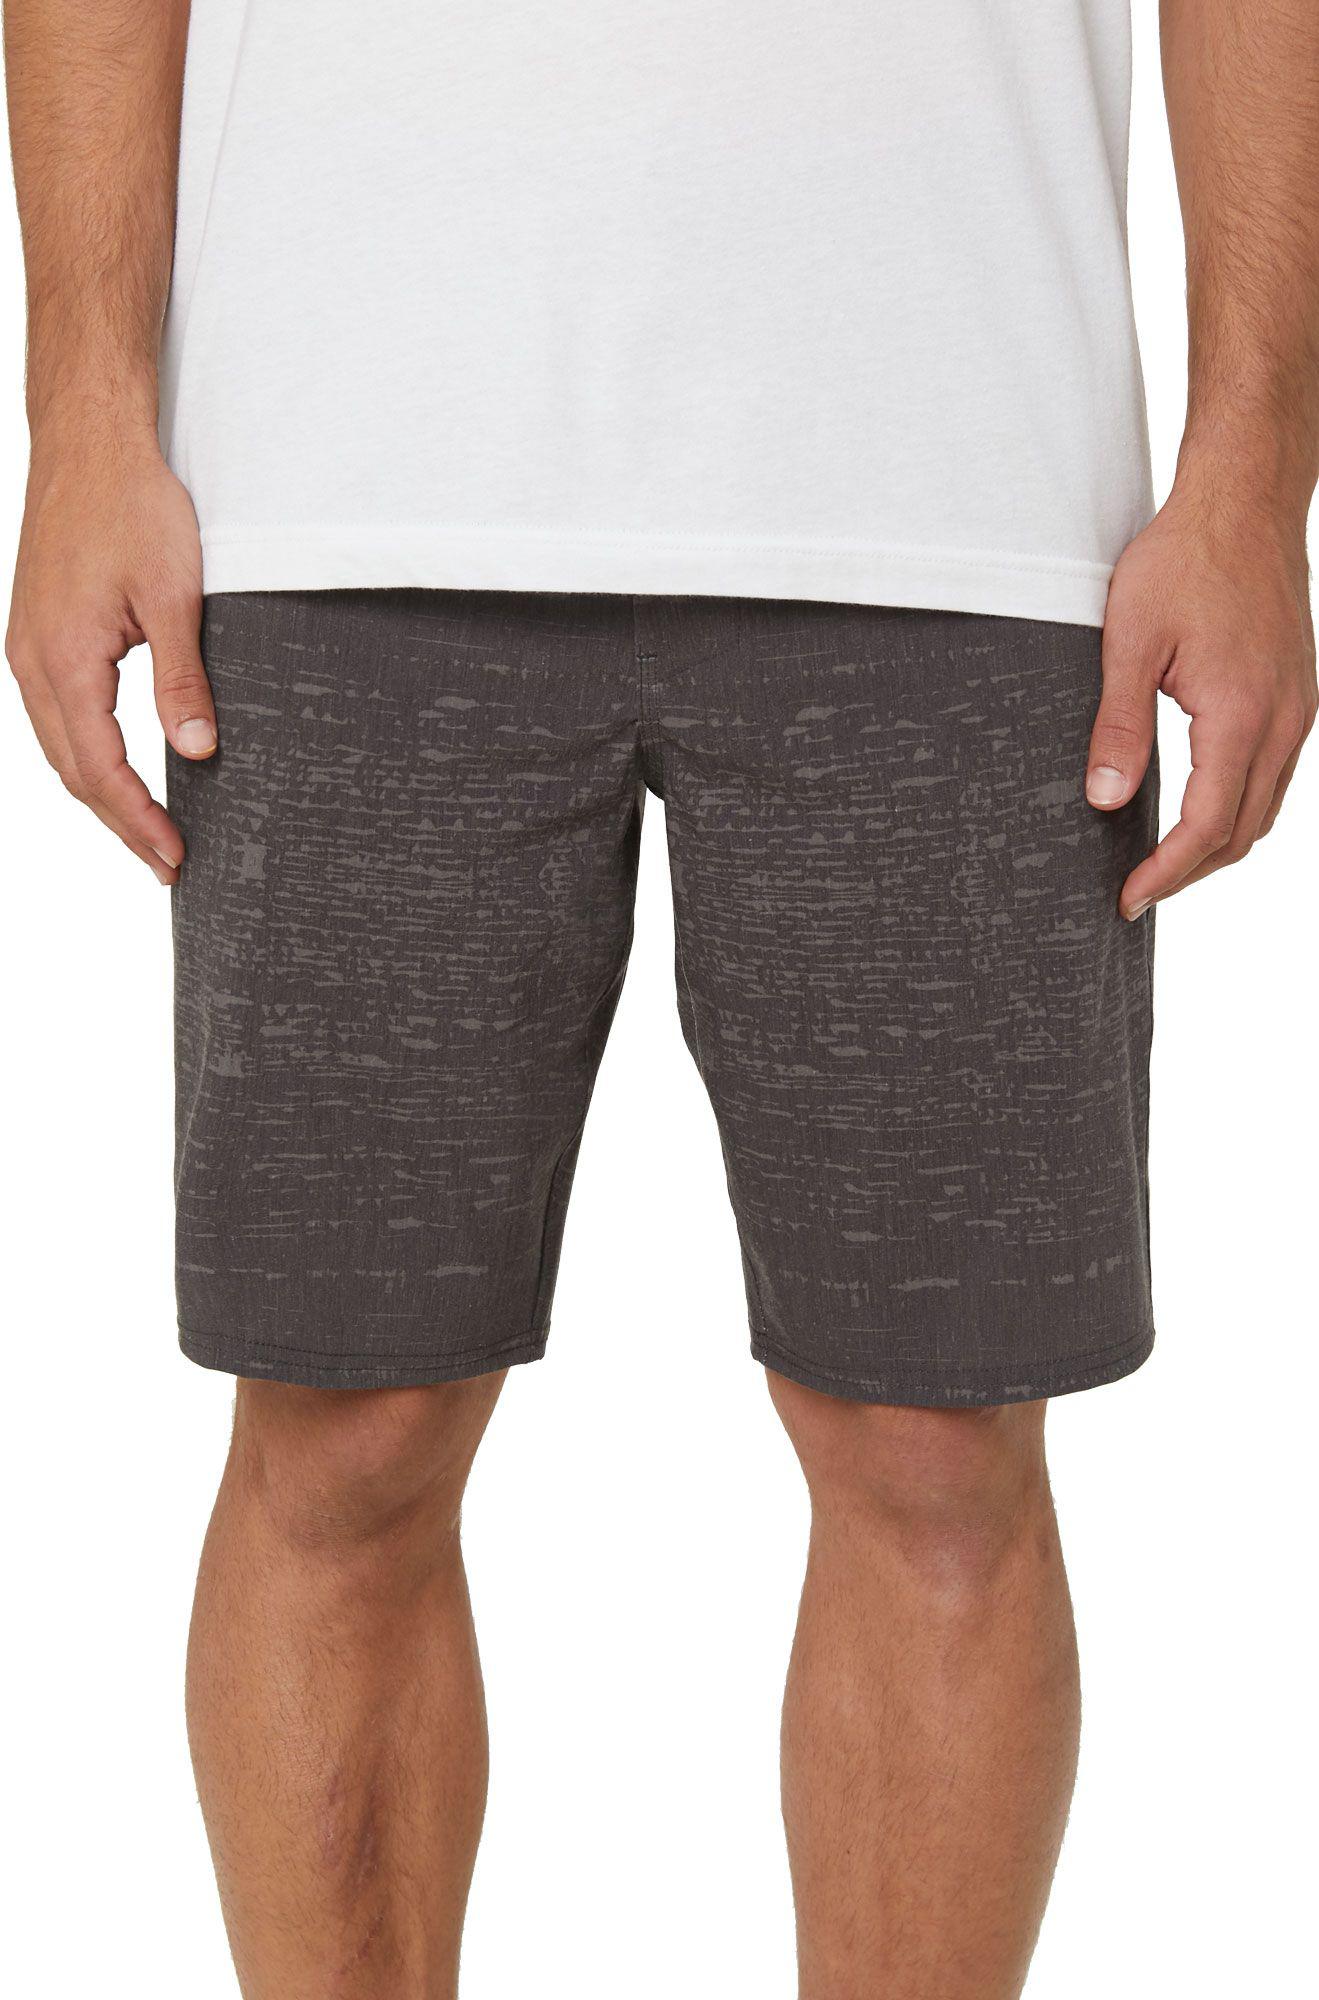 Lyst - O'neill Sportswear Collective Hybrid Shorts in Black for Men